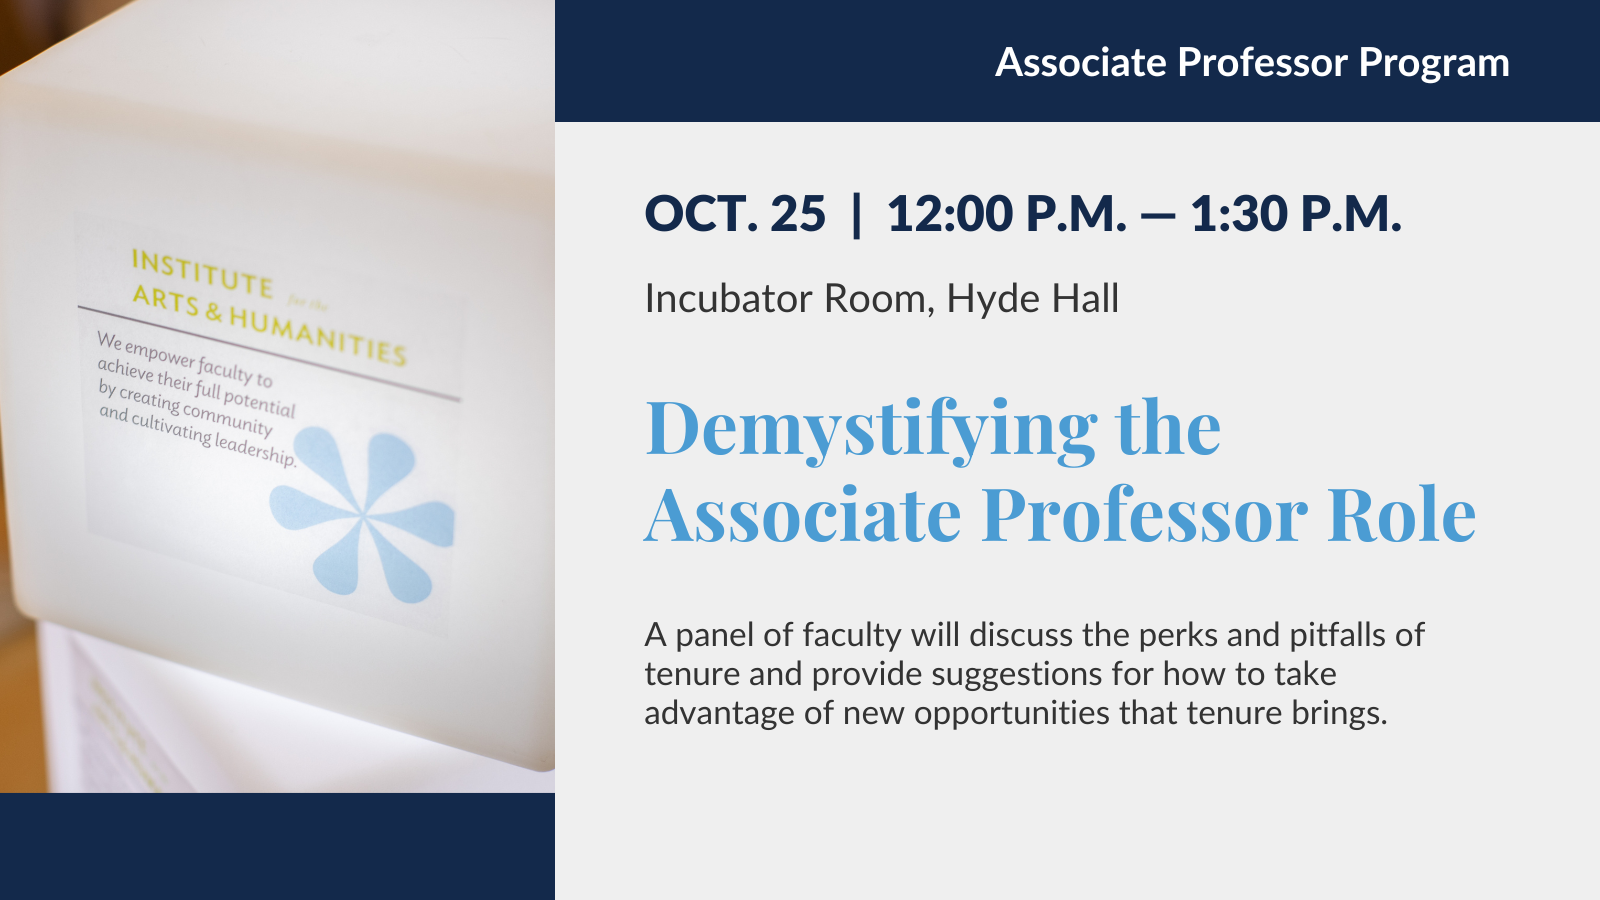 Associate Professor Program. Oct 25 12-1:30pm. Incubator Room, Hyde Hall. Demystifying the Associate Professor Role. A panel of faculty will discuss the perks and pitfalls of tenure and provide suggestions for how to take advantage of new opportunities that tenure brings.